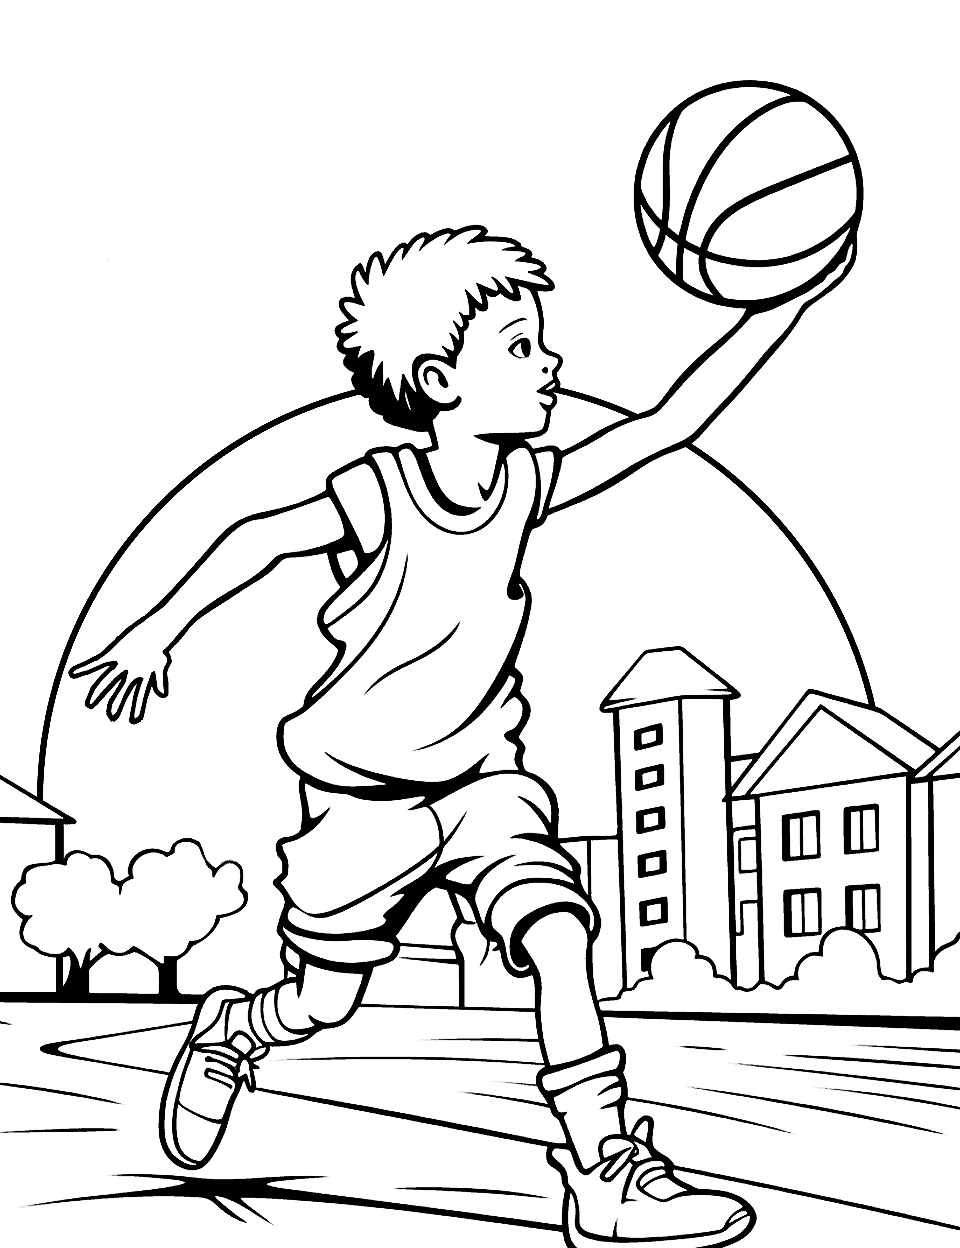 Sunset Game Basketball Coloring Page - A kid playing basketball outside during the sunset.